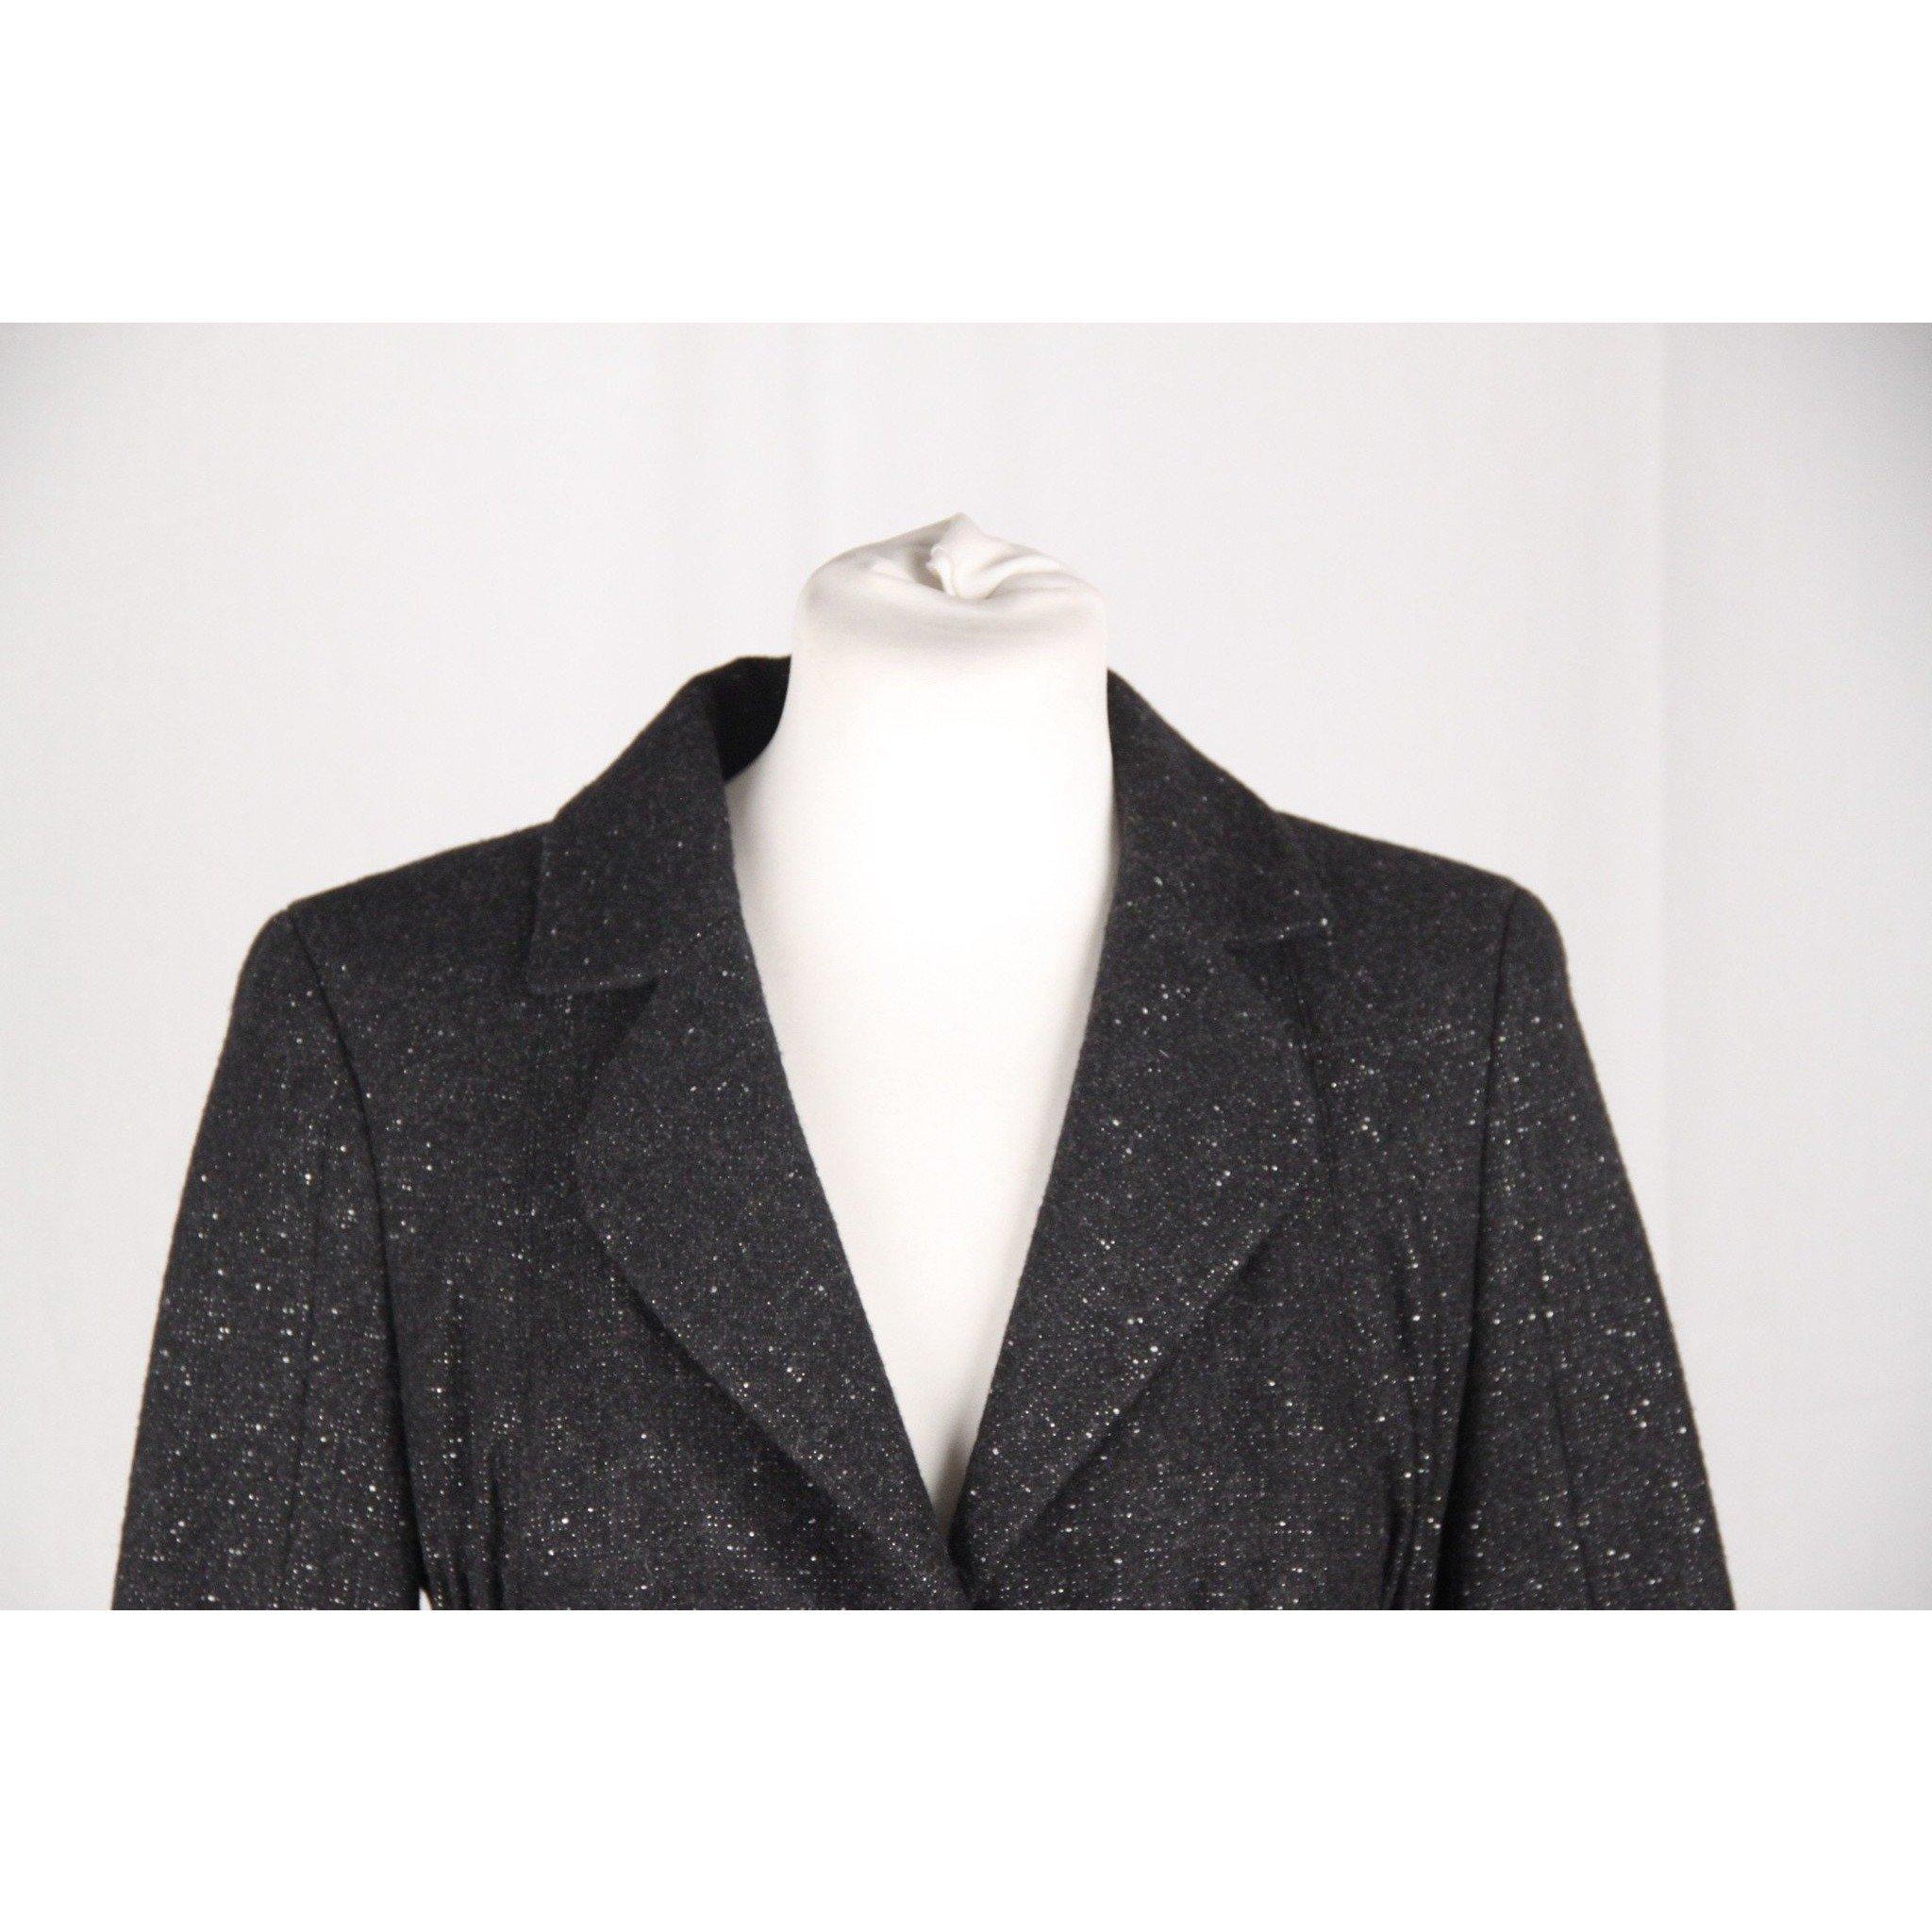 Material: 70% pure virgin wool, 17% cashmere, 7% nylon, 6% cotton Color / Effect: Black Main Closure: Button closure on the front Internal lining (color, fabric): Black silk lining Size: 38 FR, 42 I, 6 USA (The size shown for this item is the size